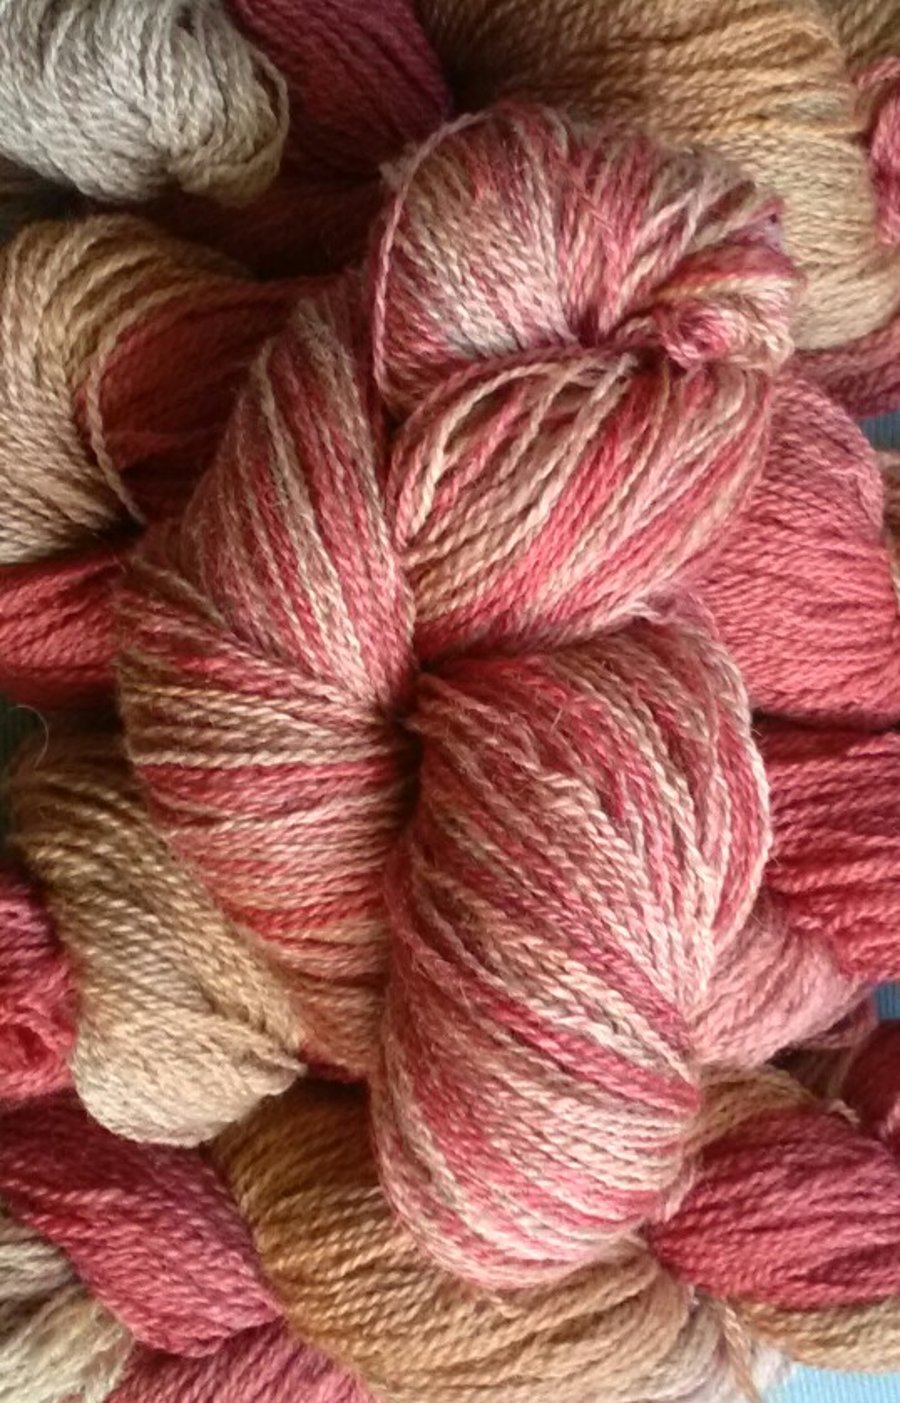 90g Hand-dyed Falklands Corridale Wool 4 ply Terracotta Straw